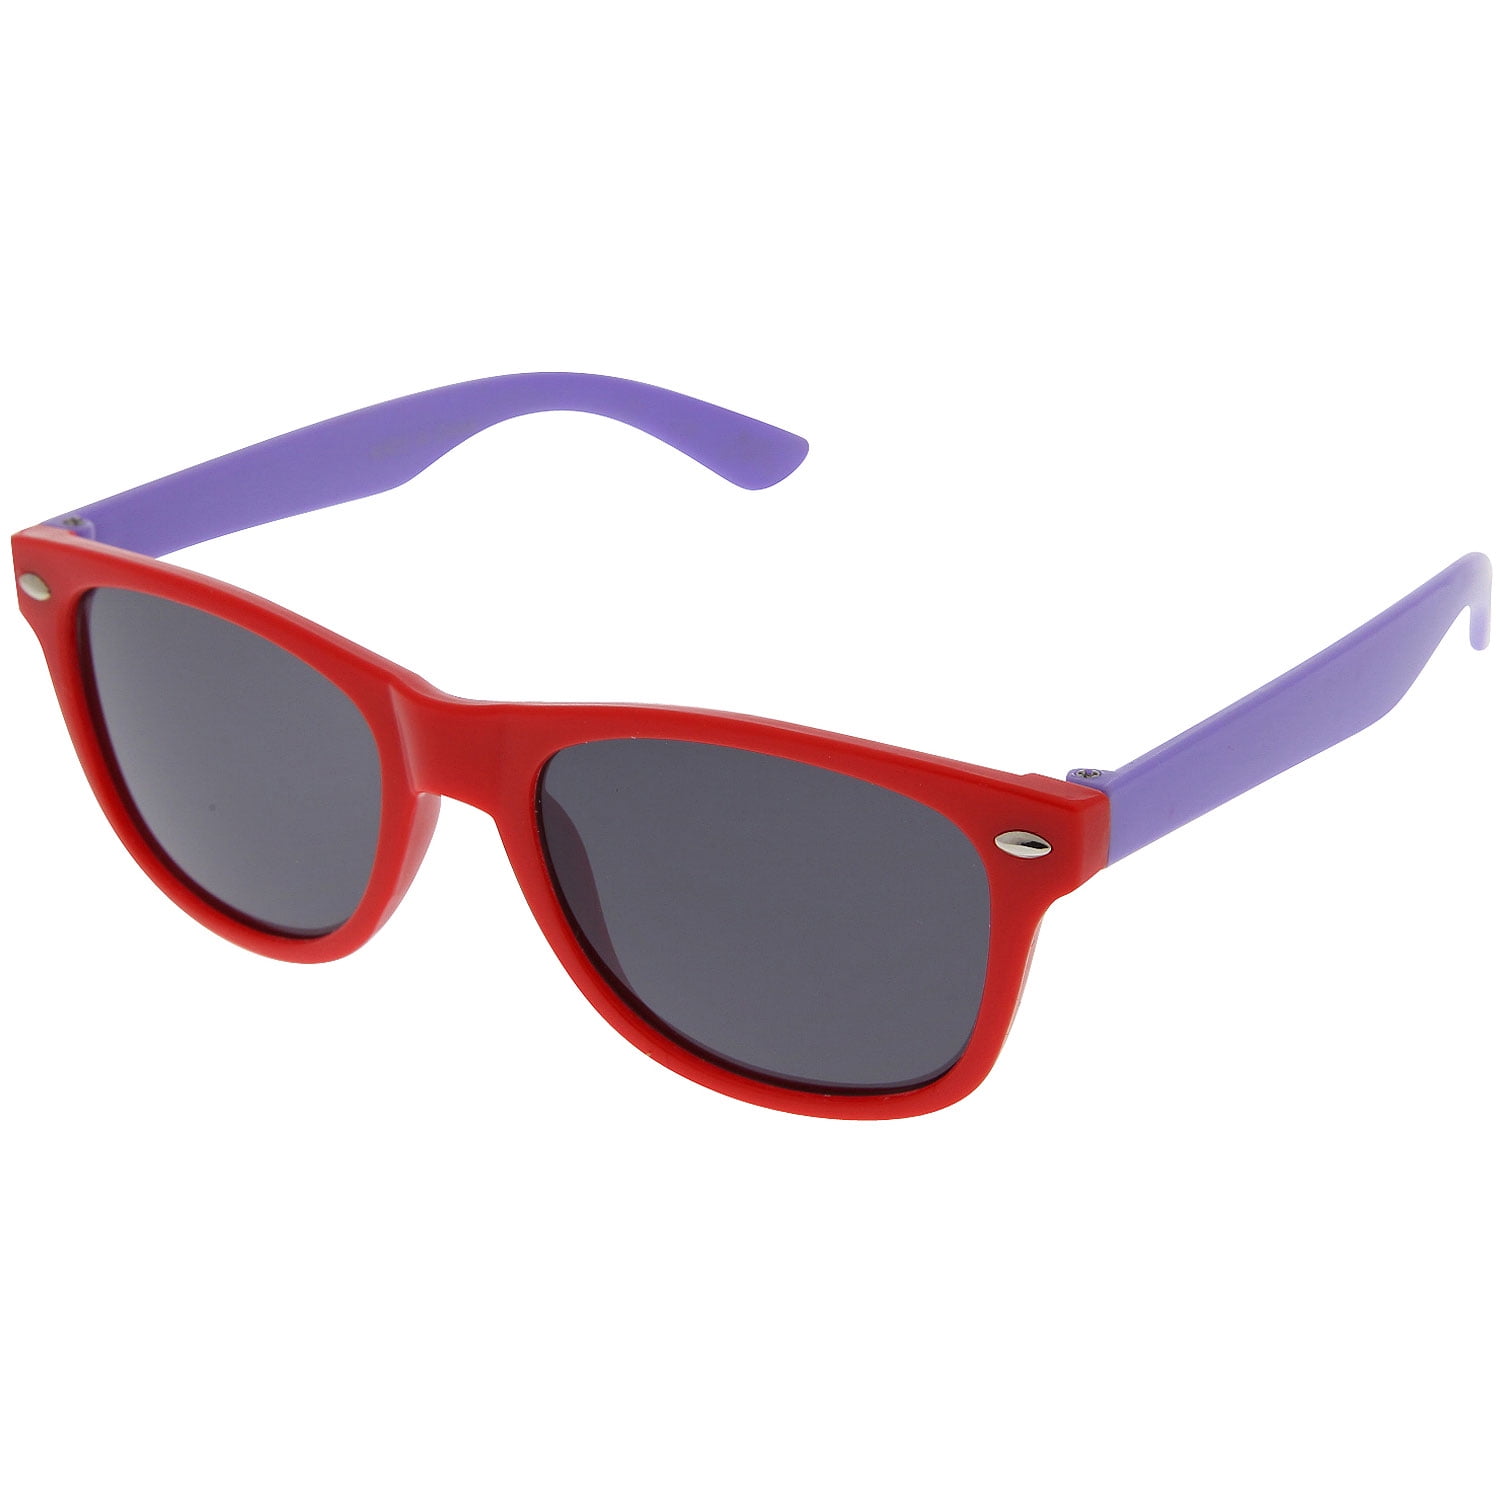 Kids Sunglasses Rated Ages 3-10 